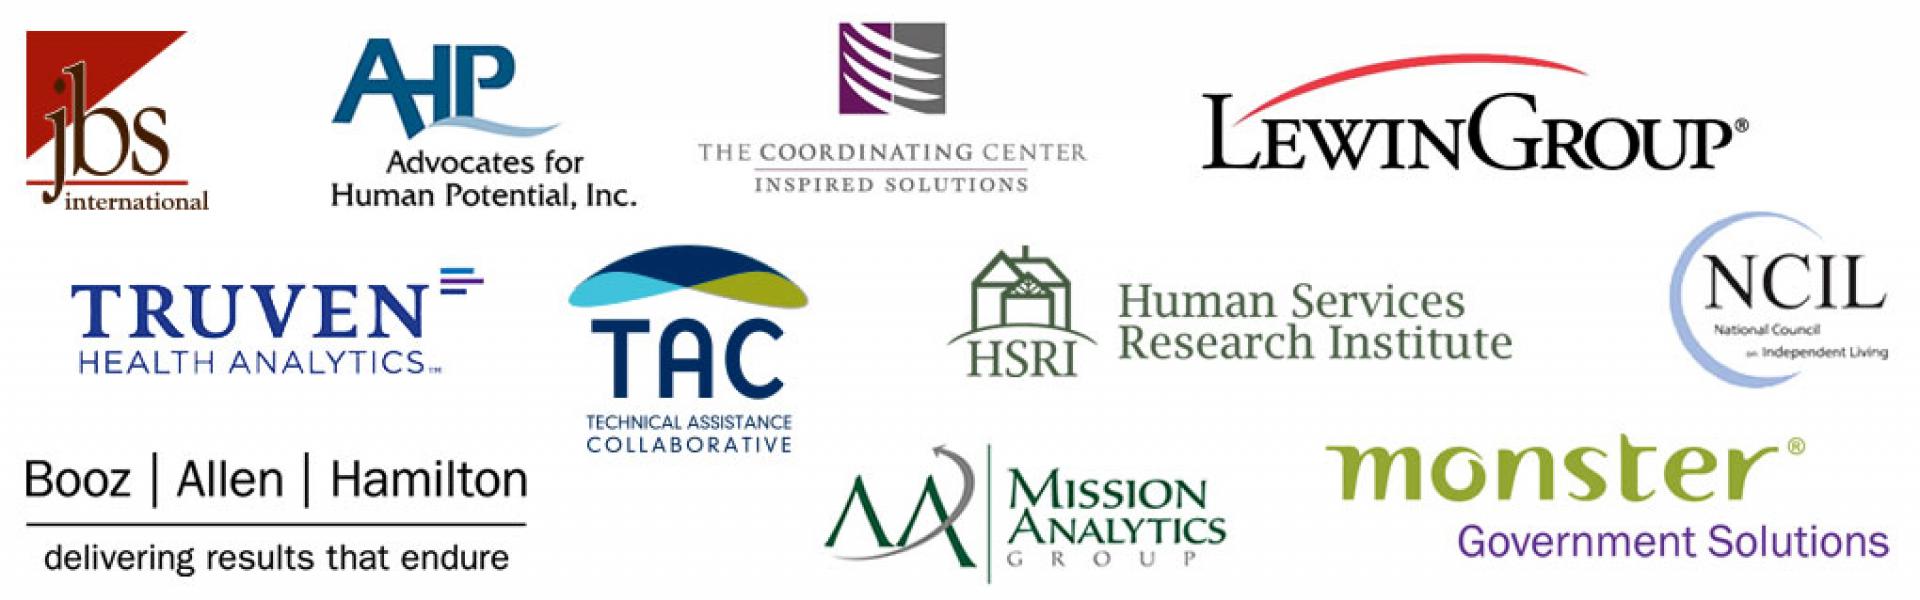 Partner logos JBS International, Advocates for Human Potential, The Coordinating Center, Lewin Group, Truven Health Analytics, Technical Assistance Collaborative, Husman Services Research Institute, National Council on Independent Livinv, Booz Allen Hamilton, Mission Analytics Group, Monster Government Solutions, 